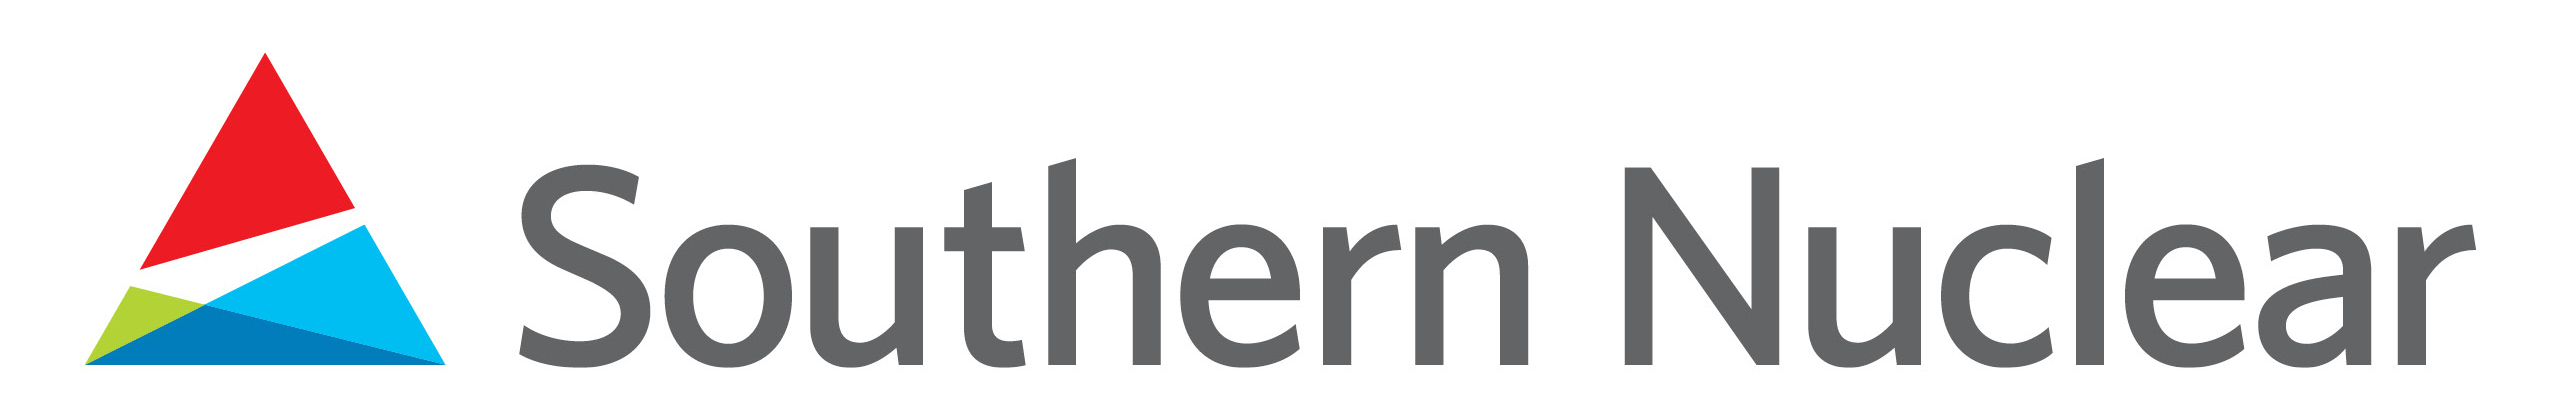 southern nuclear logo